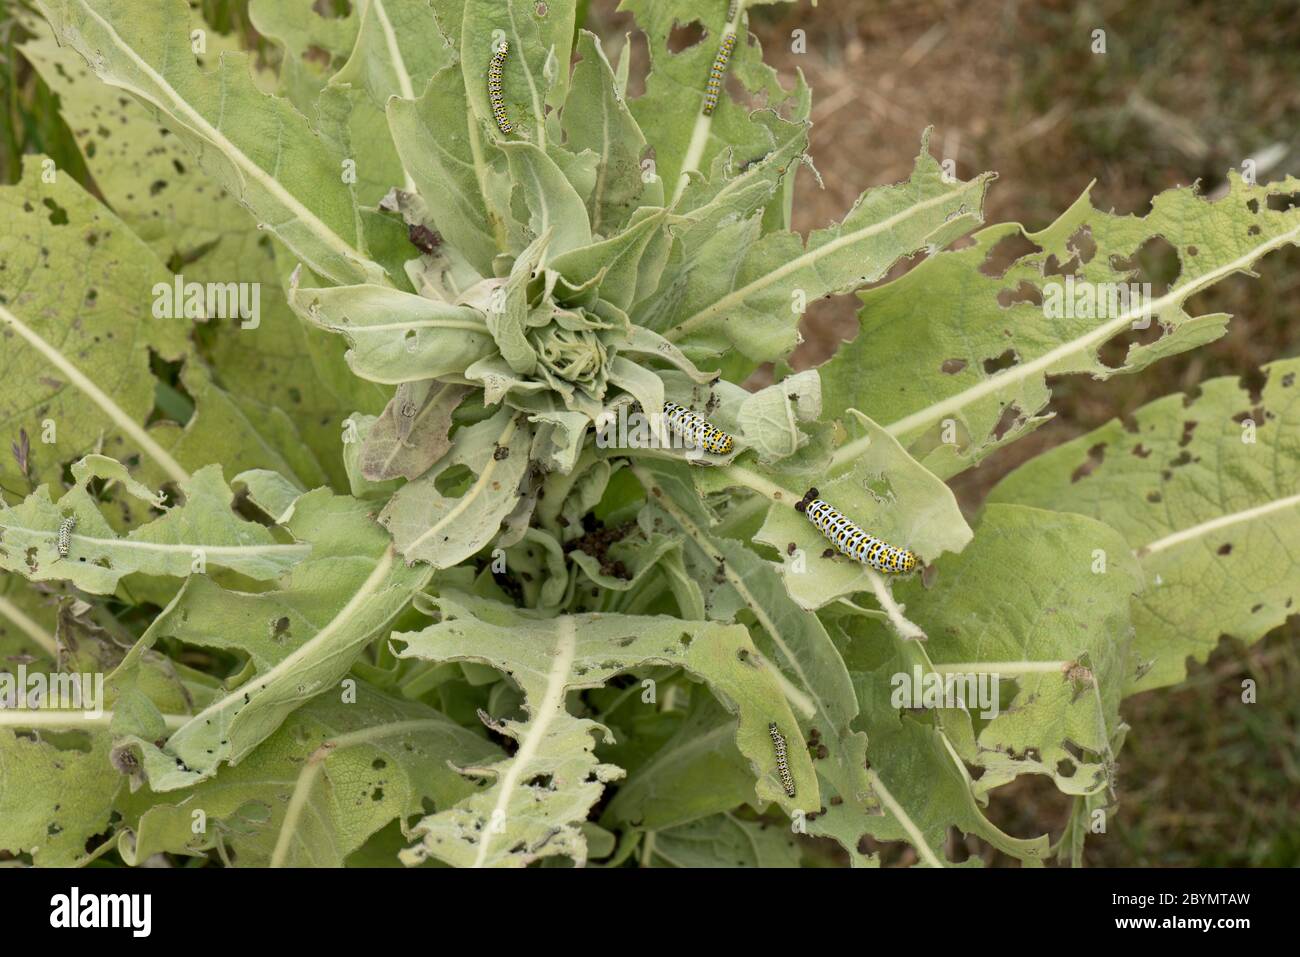 Mullein moth (Cucullia verbasci) caterpillars and severe damage to a mullein (Verbascum sp.) leaves, Berkshire, June Stock Photo